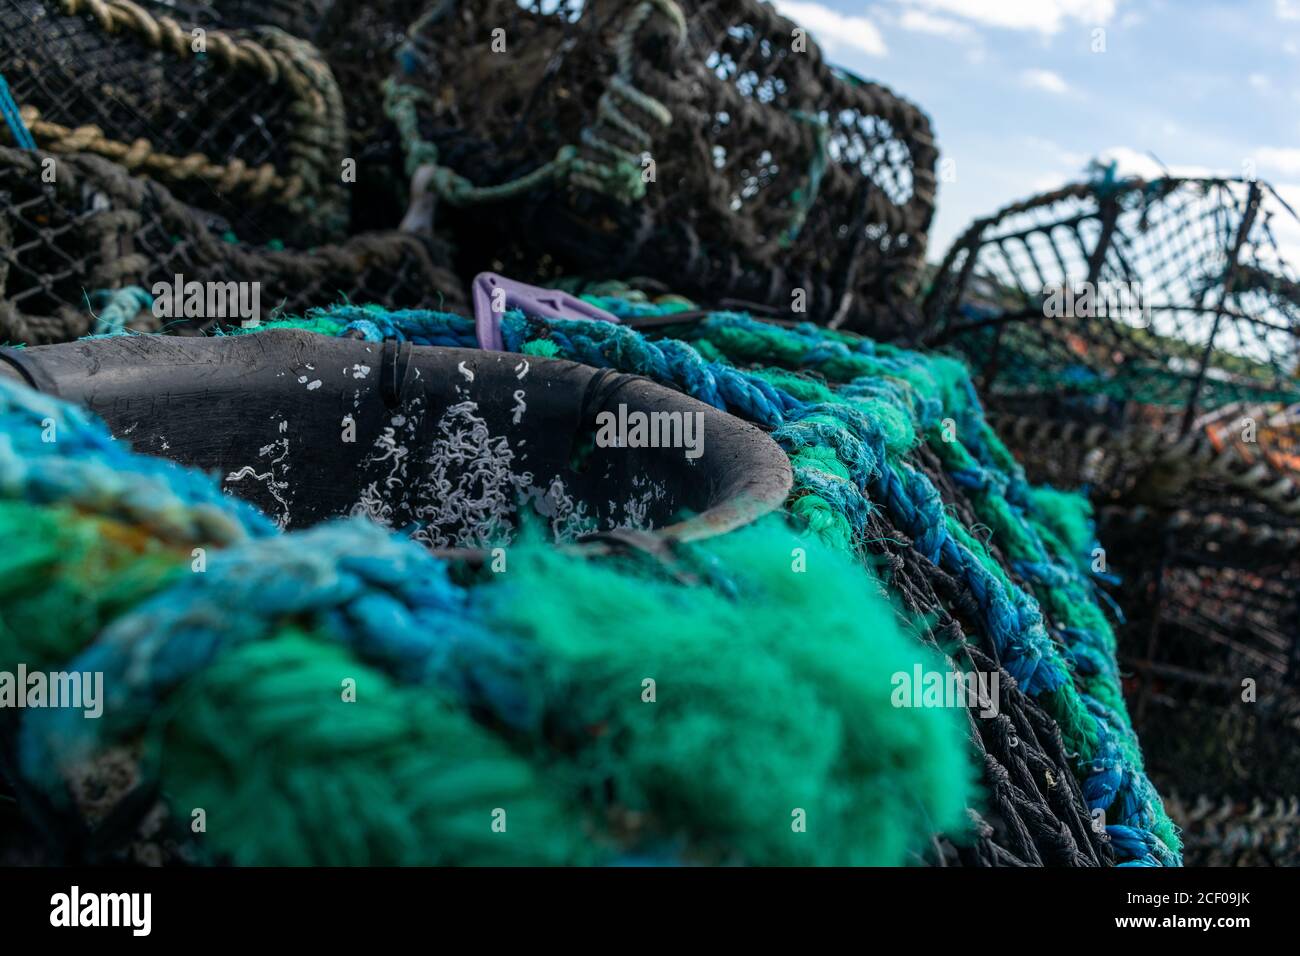 Crab trap cages in piles, clue rope closeup, dirty cages used to catch  large numbers of crabs in Mudeford Quay UK, sea creatures exploitaition,  close Stock Photo - Alamy